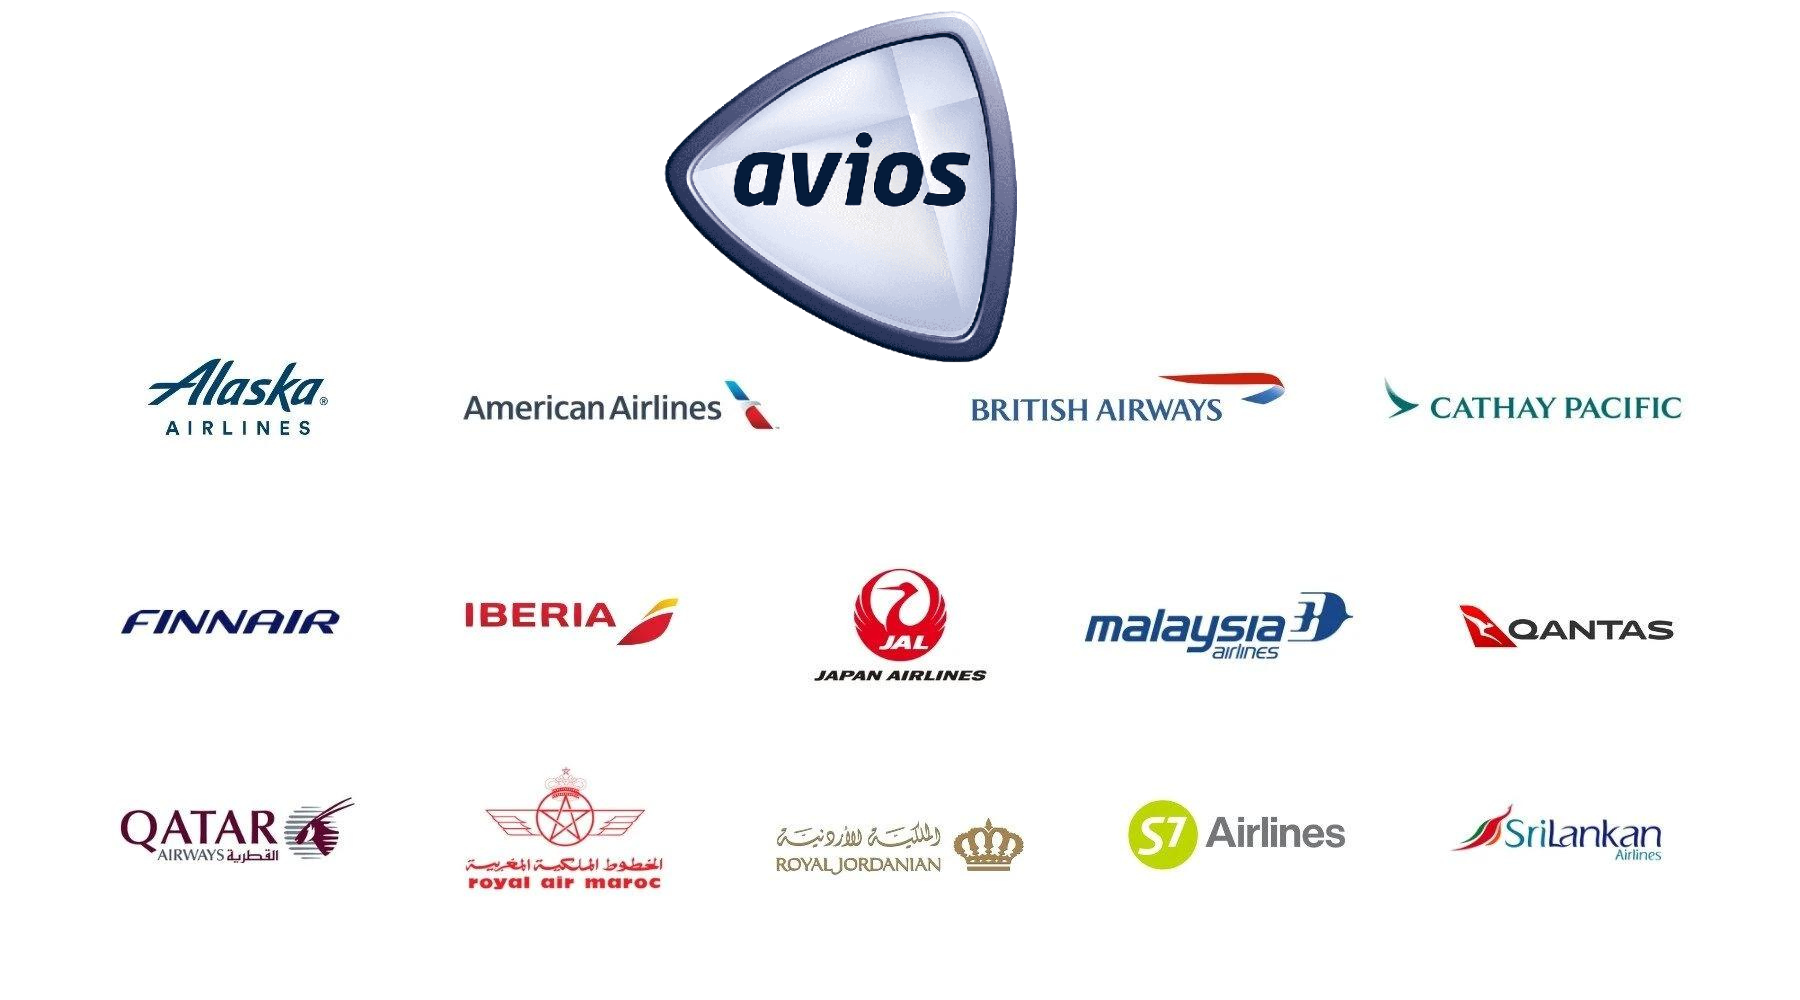 Using Avios for flights on different airlines